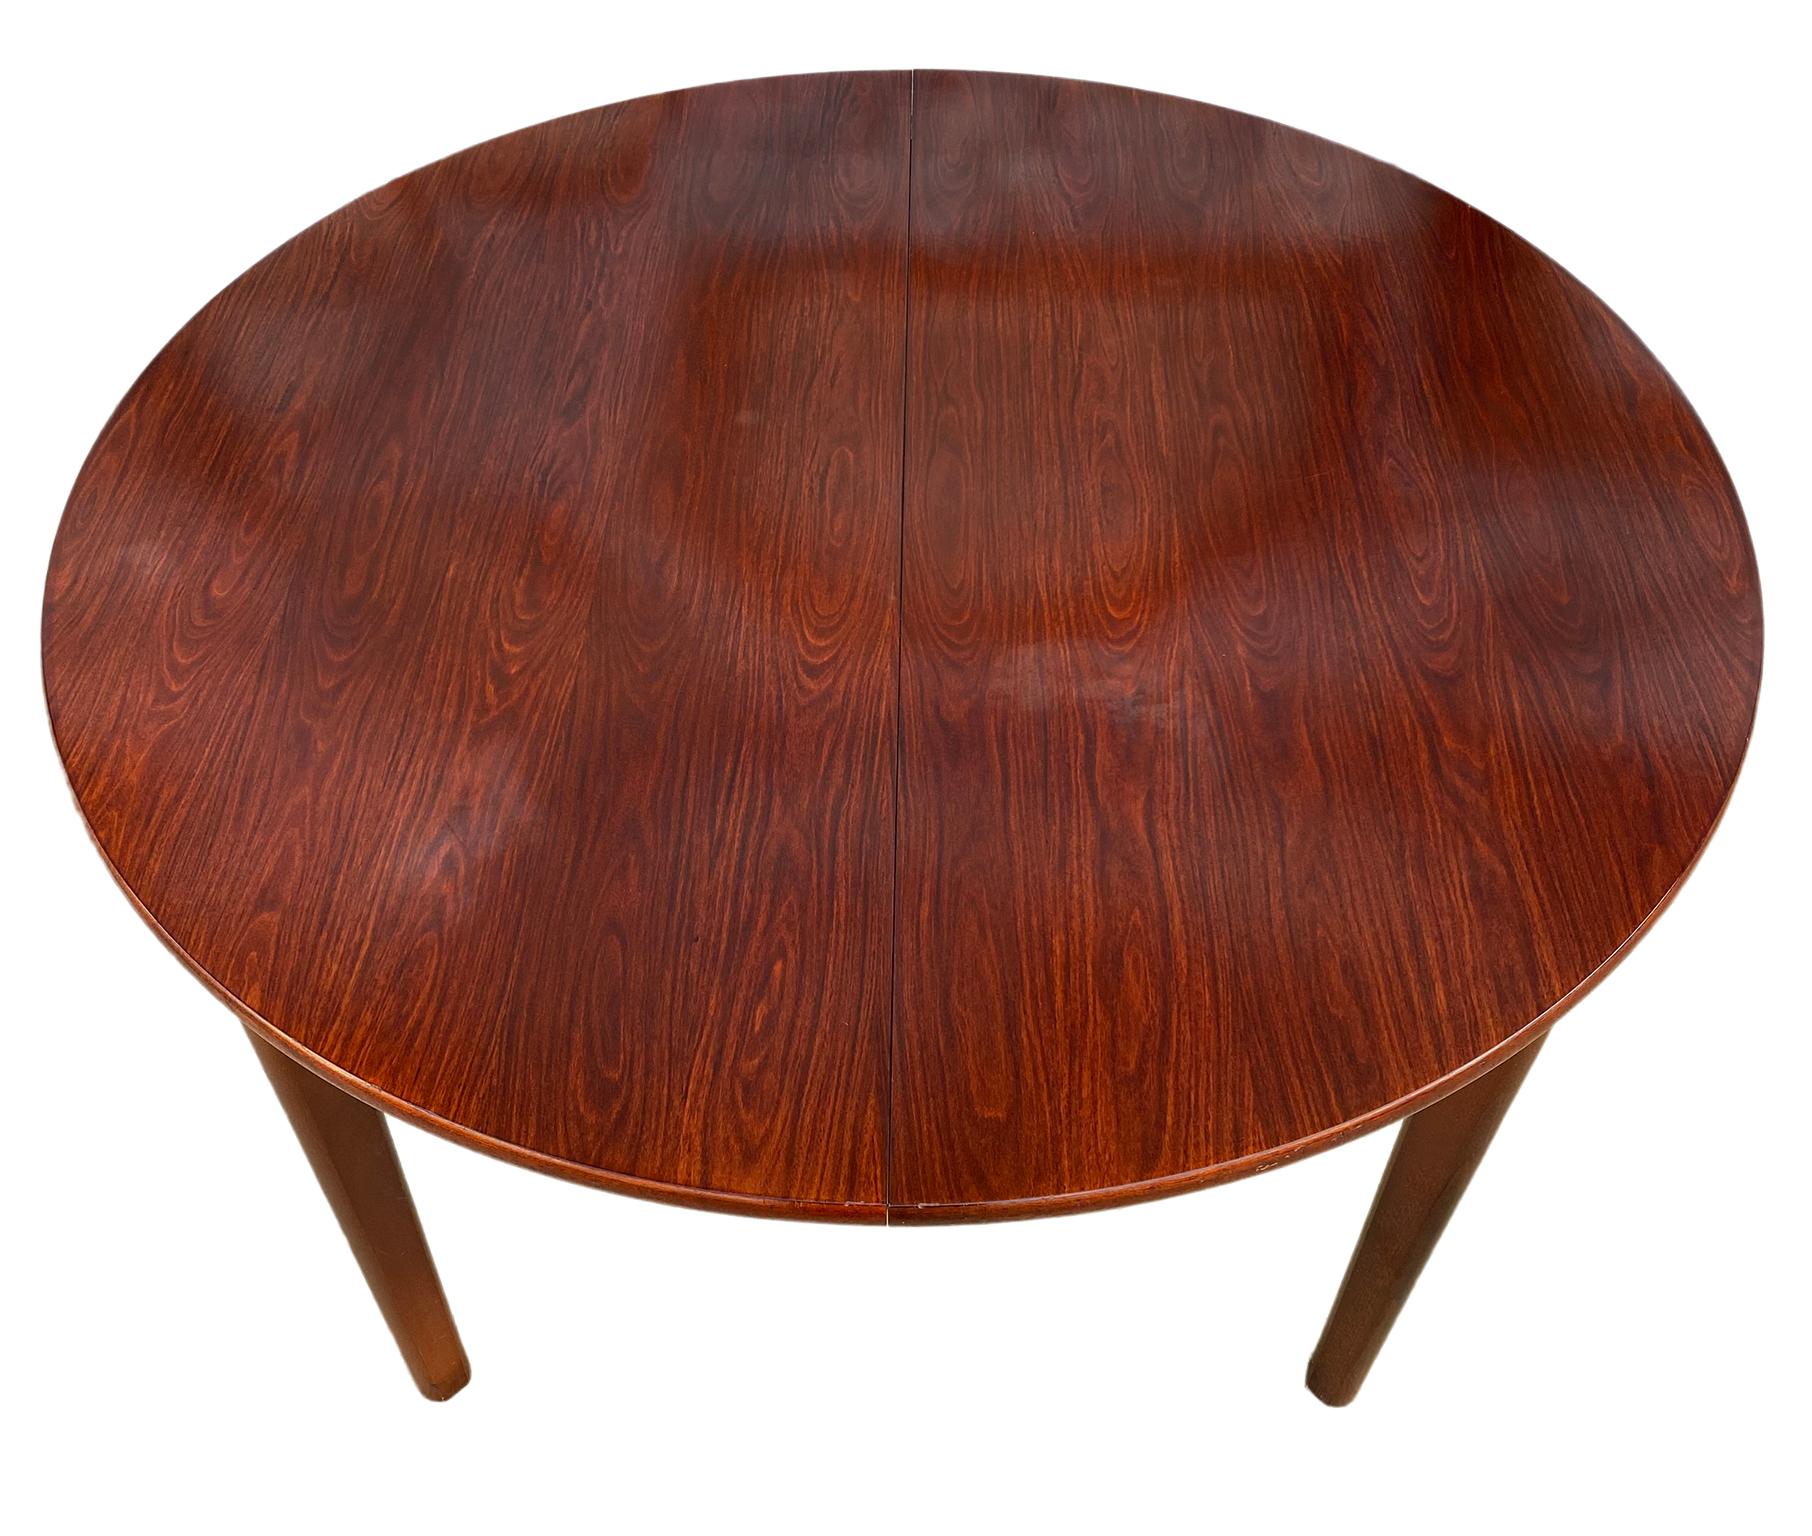 Midcentury rosewood expandable round dining table with 1 nesting leaf. This is a beautiful dining table Made in Denmark. Amazing solid wood legs. Made, circa 1960. Original finish in excellent condition. Documented AM Mobler. Measures: 48